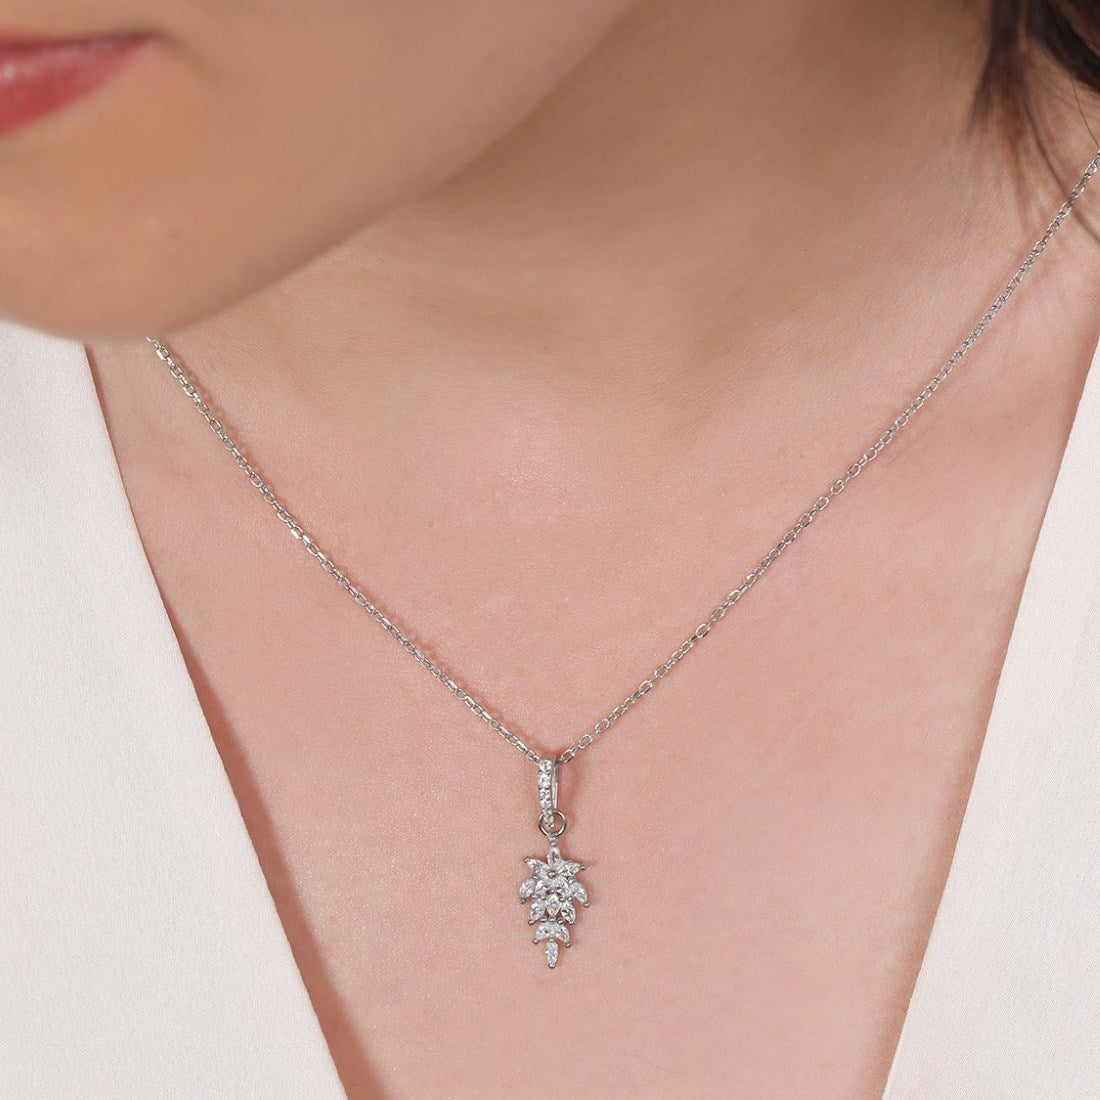 Luminous Leaf Whispers 925 Sterling Silver Rhodium-Plated Leaf Necklace